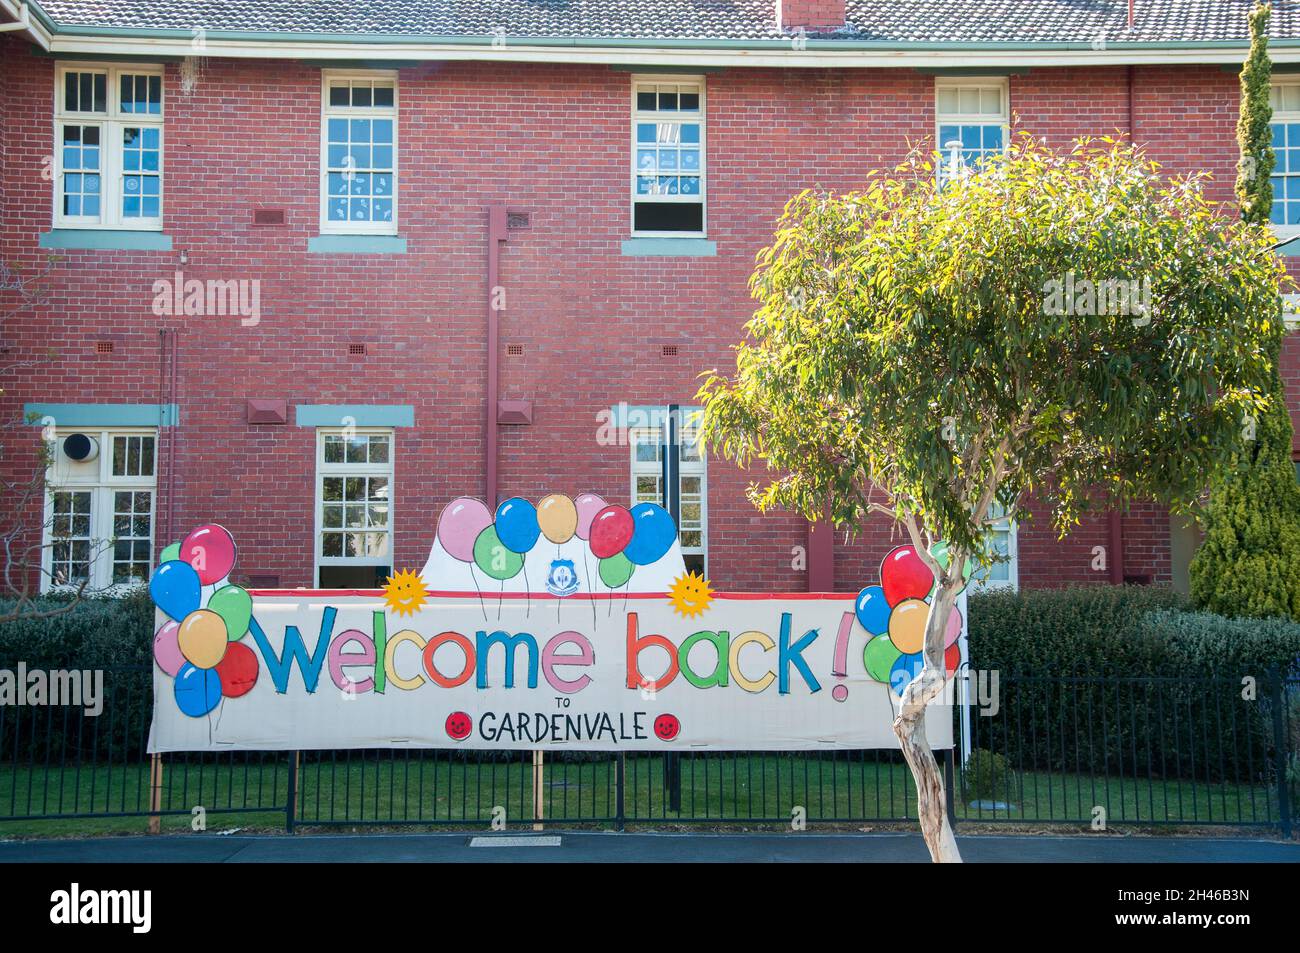 Primary (elementary) school in suburban Gardenvale welcomes back classes after weeks of lockdown and home schooling. Melbourne, Victoria Stock Photo